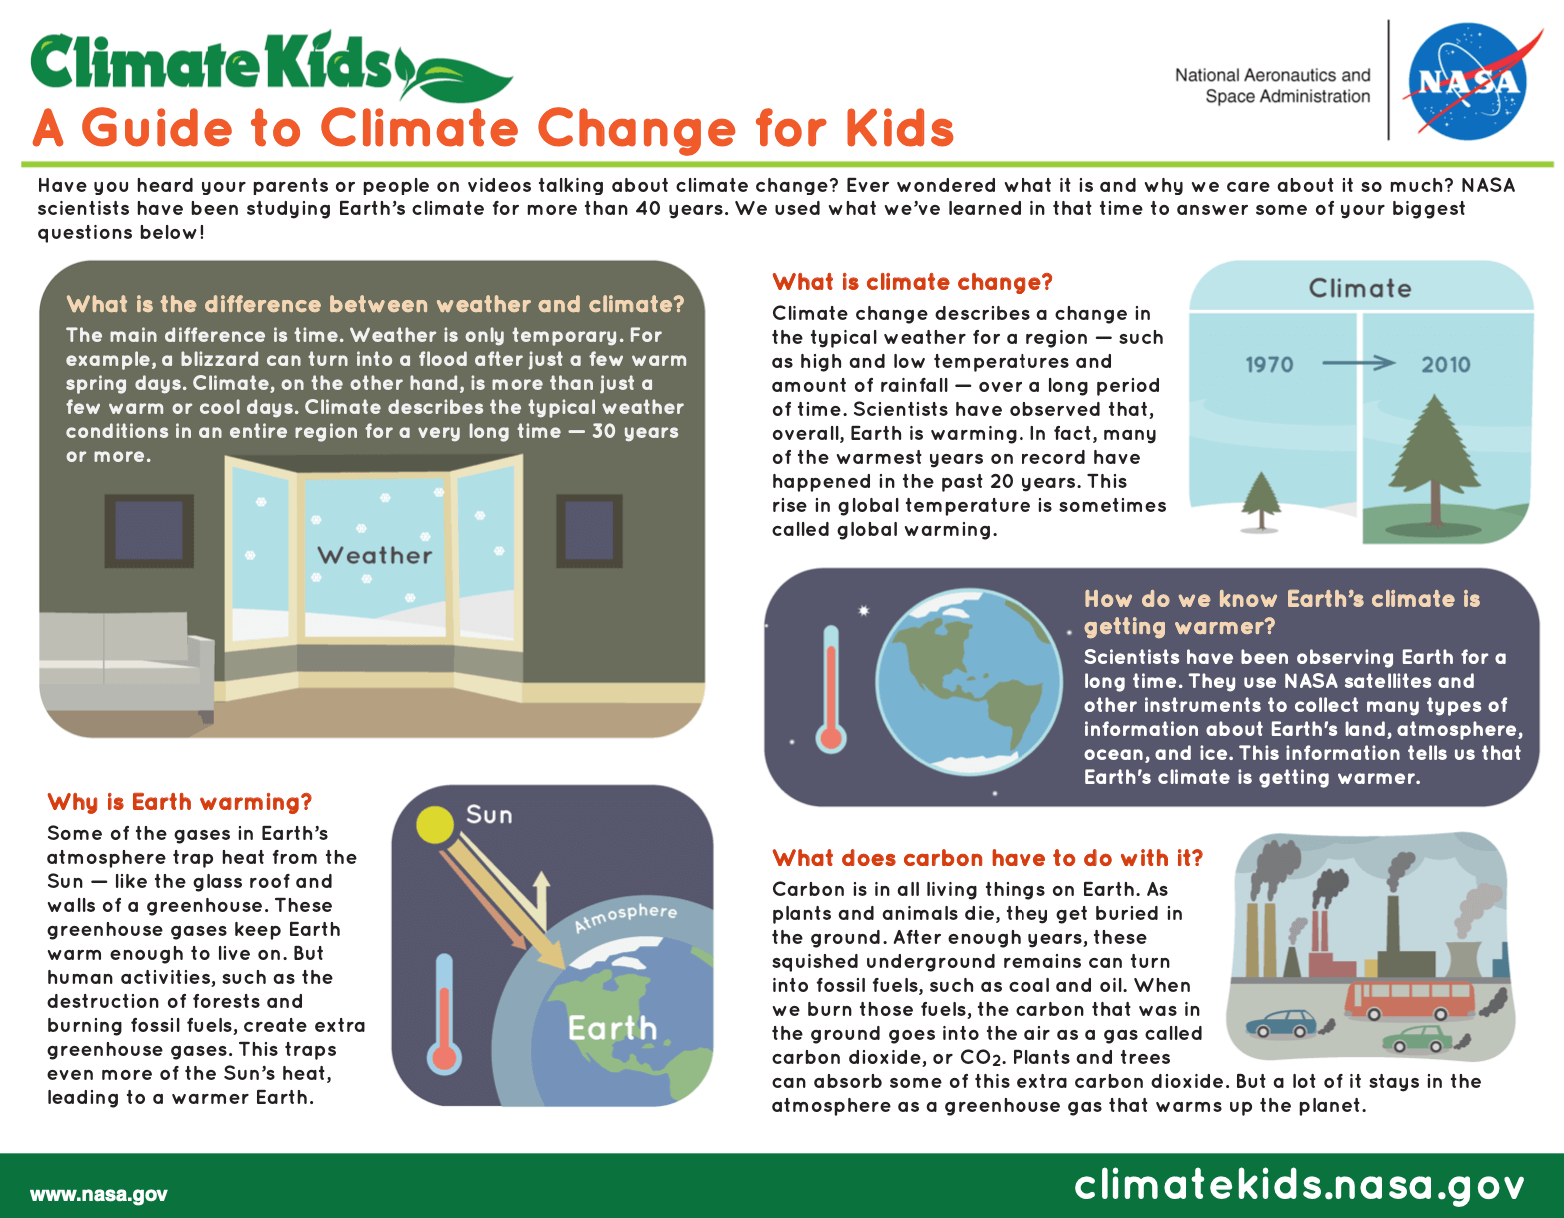 Screenshot of the A Guide to Climate Change for Kids PDF, which contains all the information from this web page.